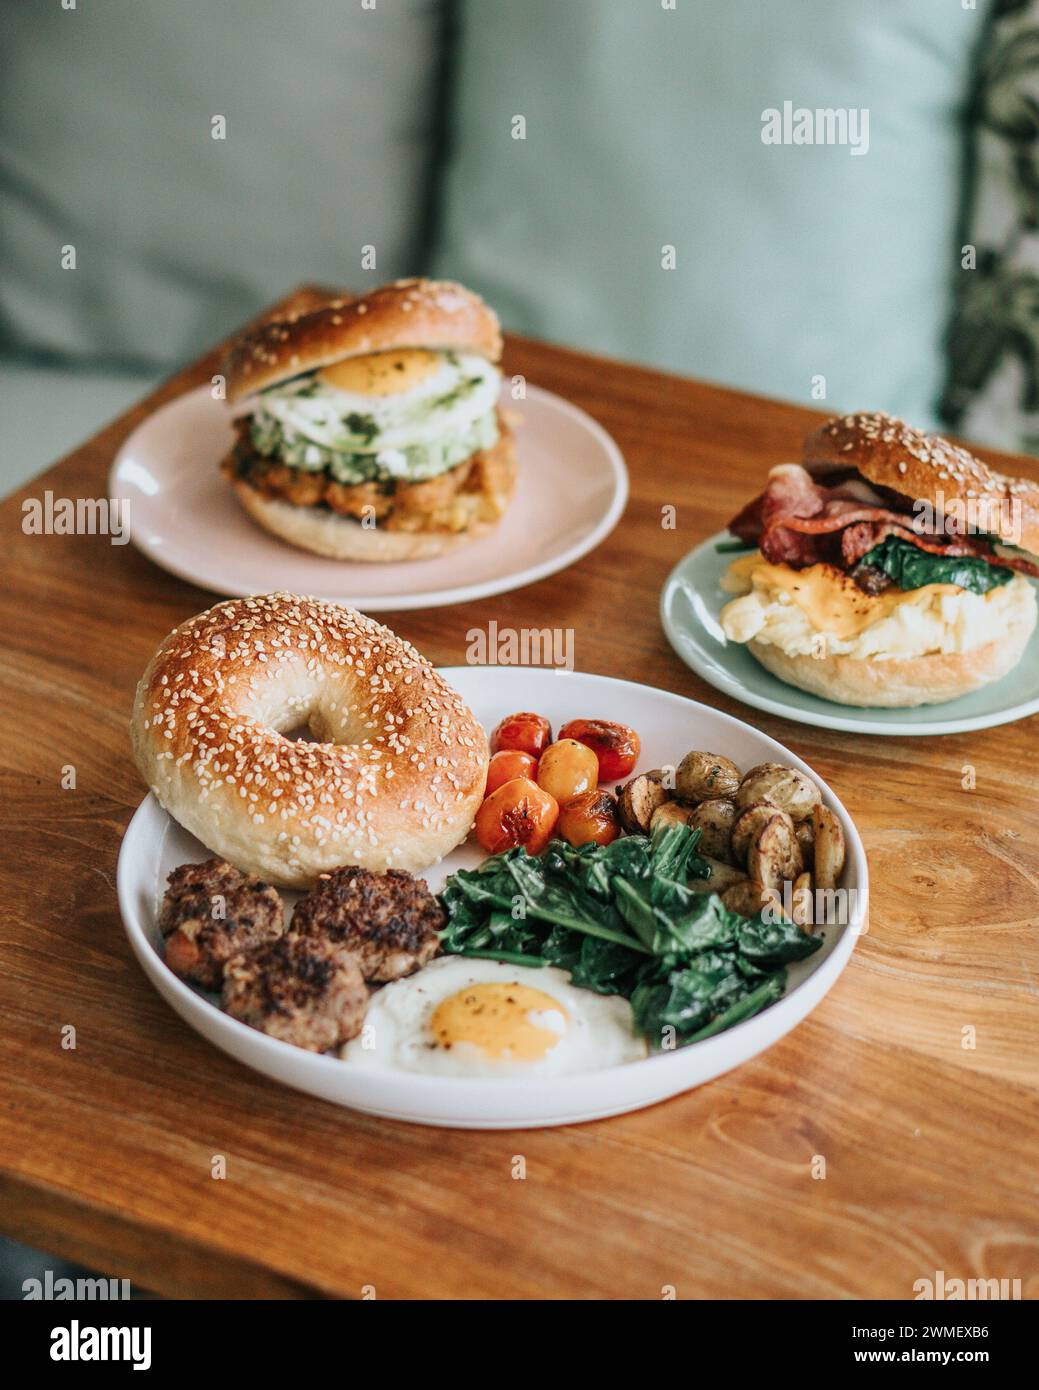 Three plates of food on a wooden table is a breakfast sandwich on a toasted bagel, salad, and burrito Stock Photo